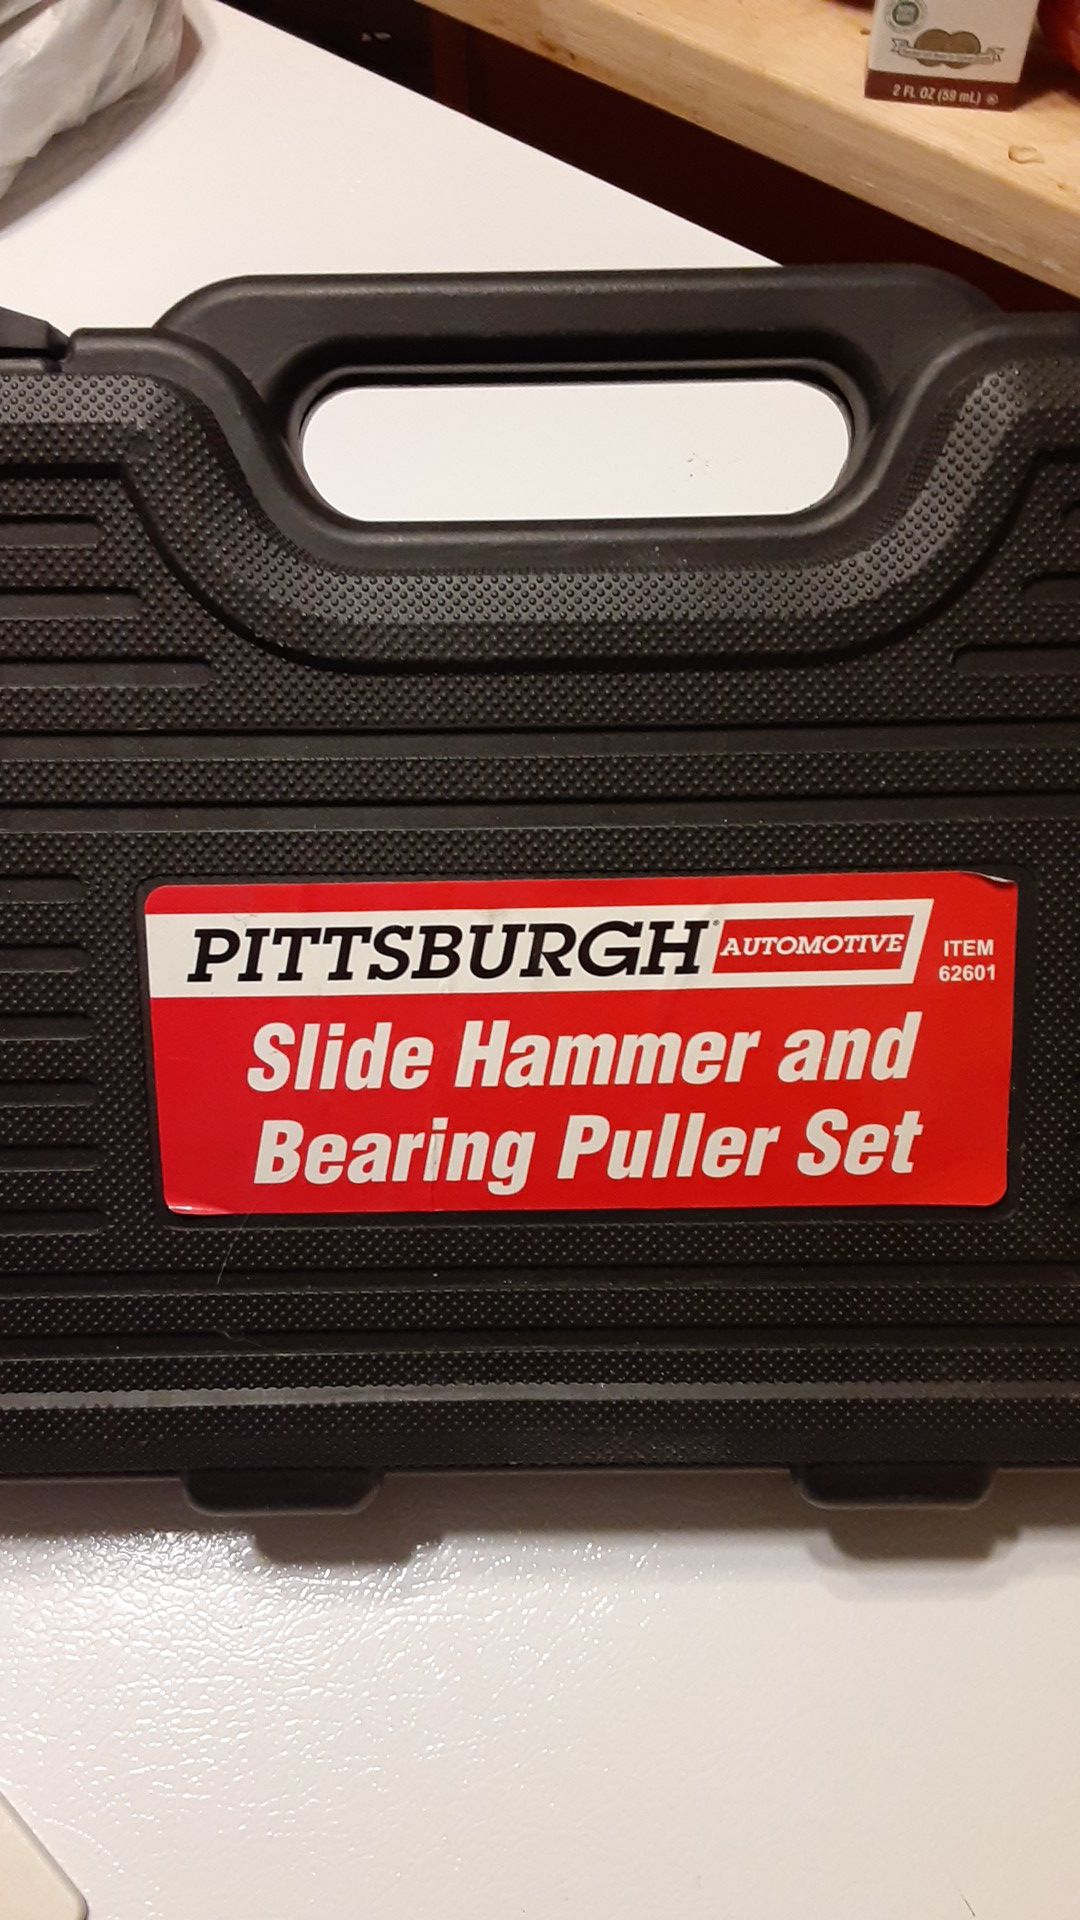 PITTSBURGH AUTOMOTIVE Slide Hammer And Bearing Puller Set, 5 Pc.